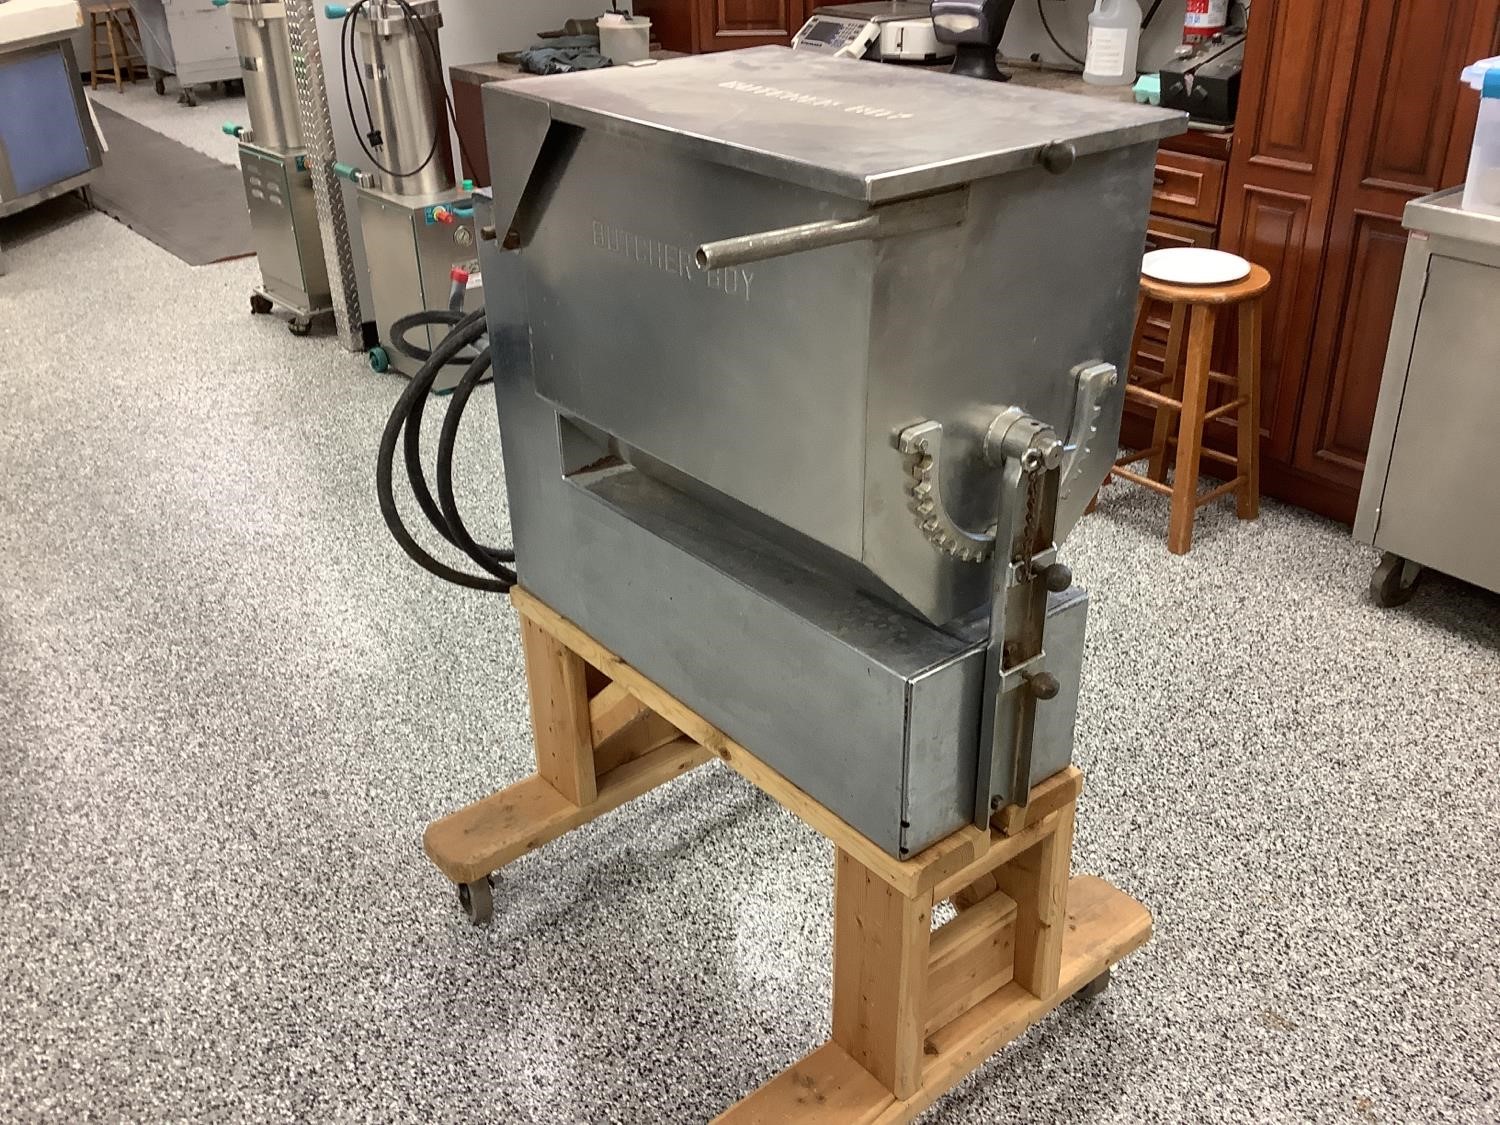 Cabela's Stainless Steel Meat Mixer BigIron Auctions